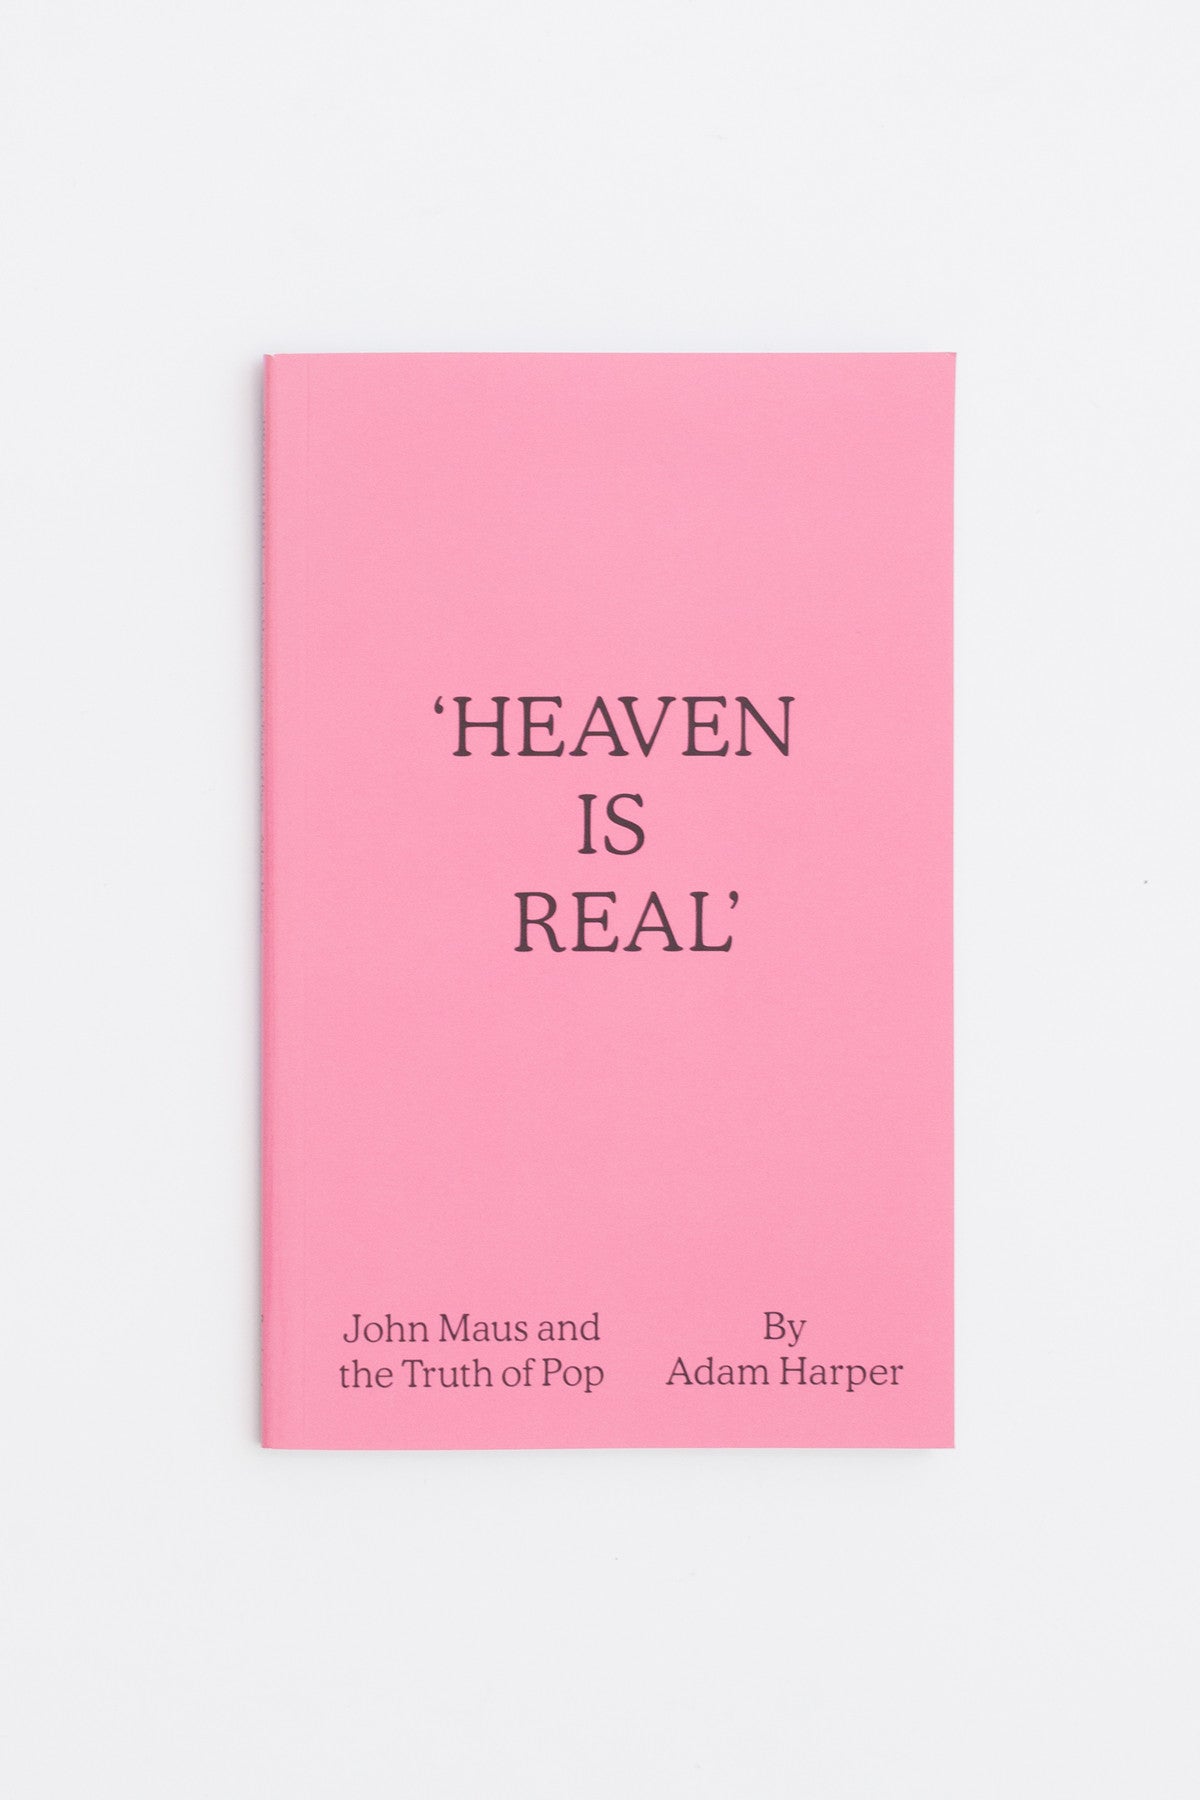 Heaven is Real: John Maus and the Truth of Pop - Adam Harper